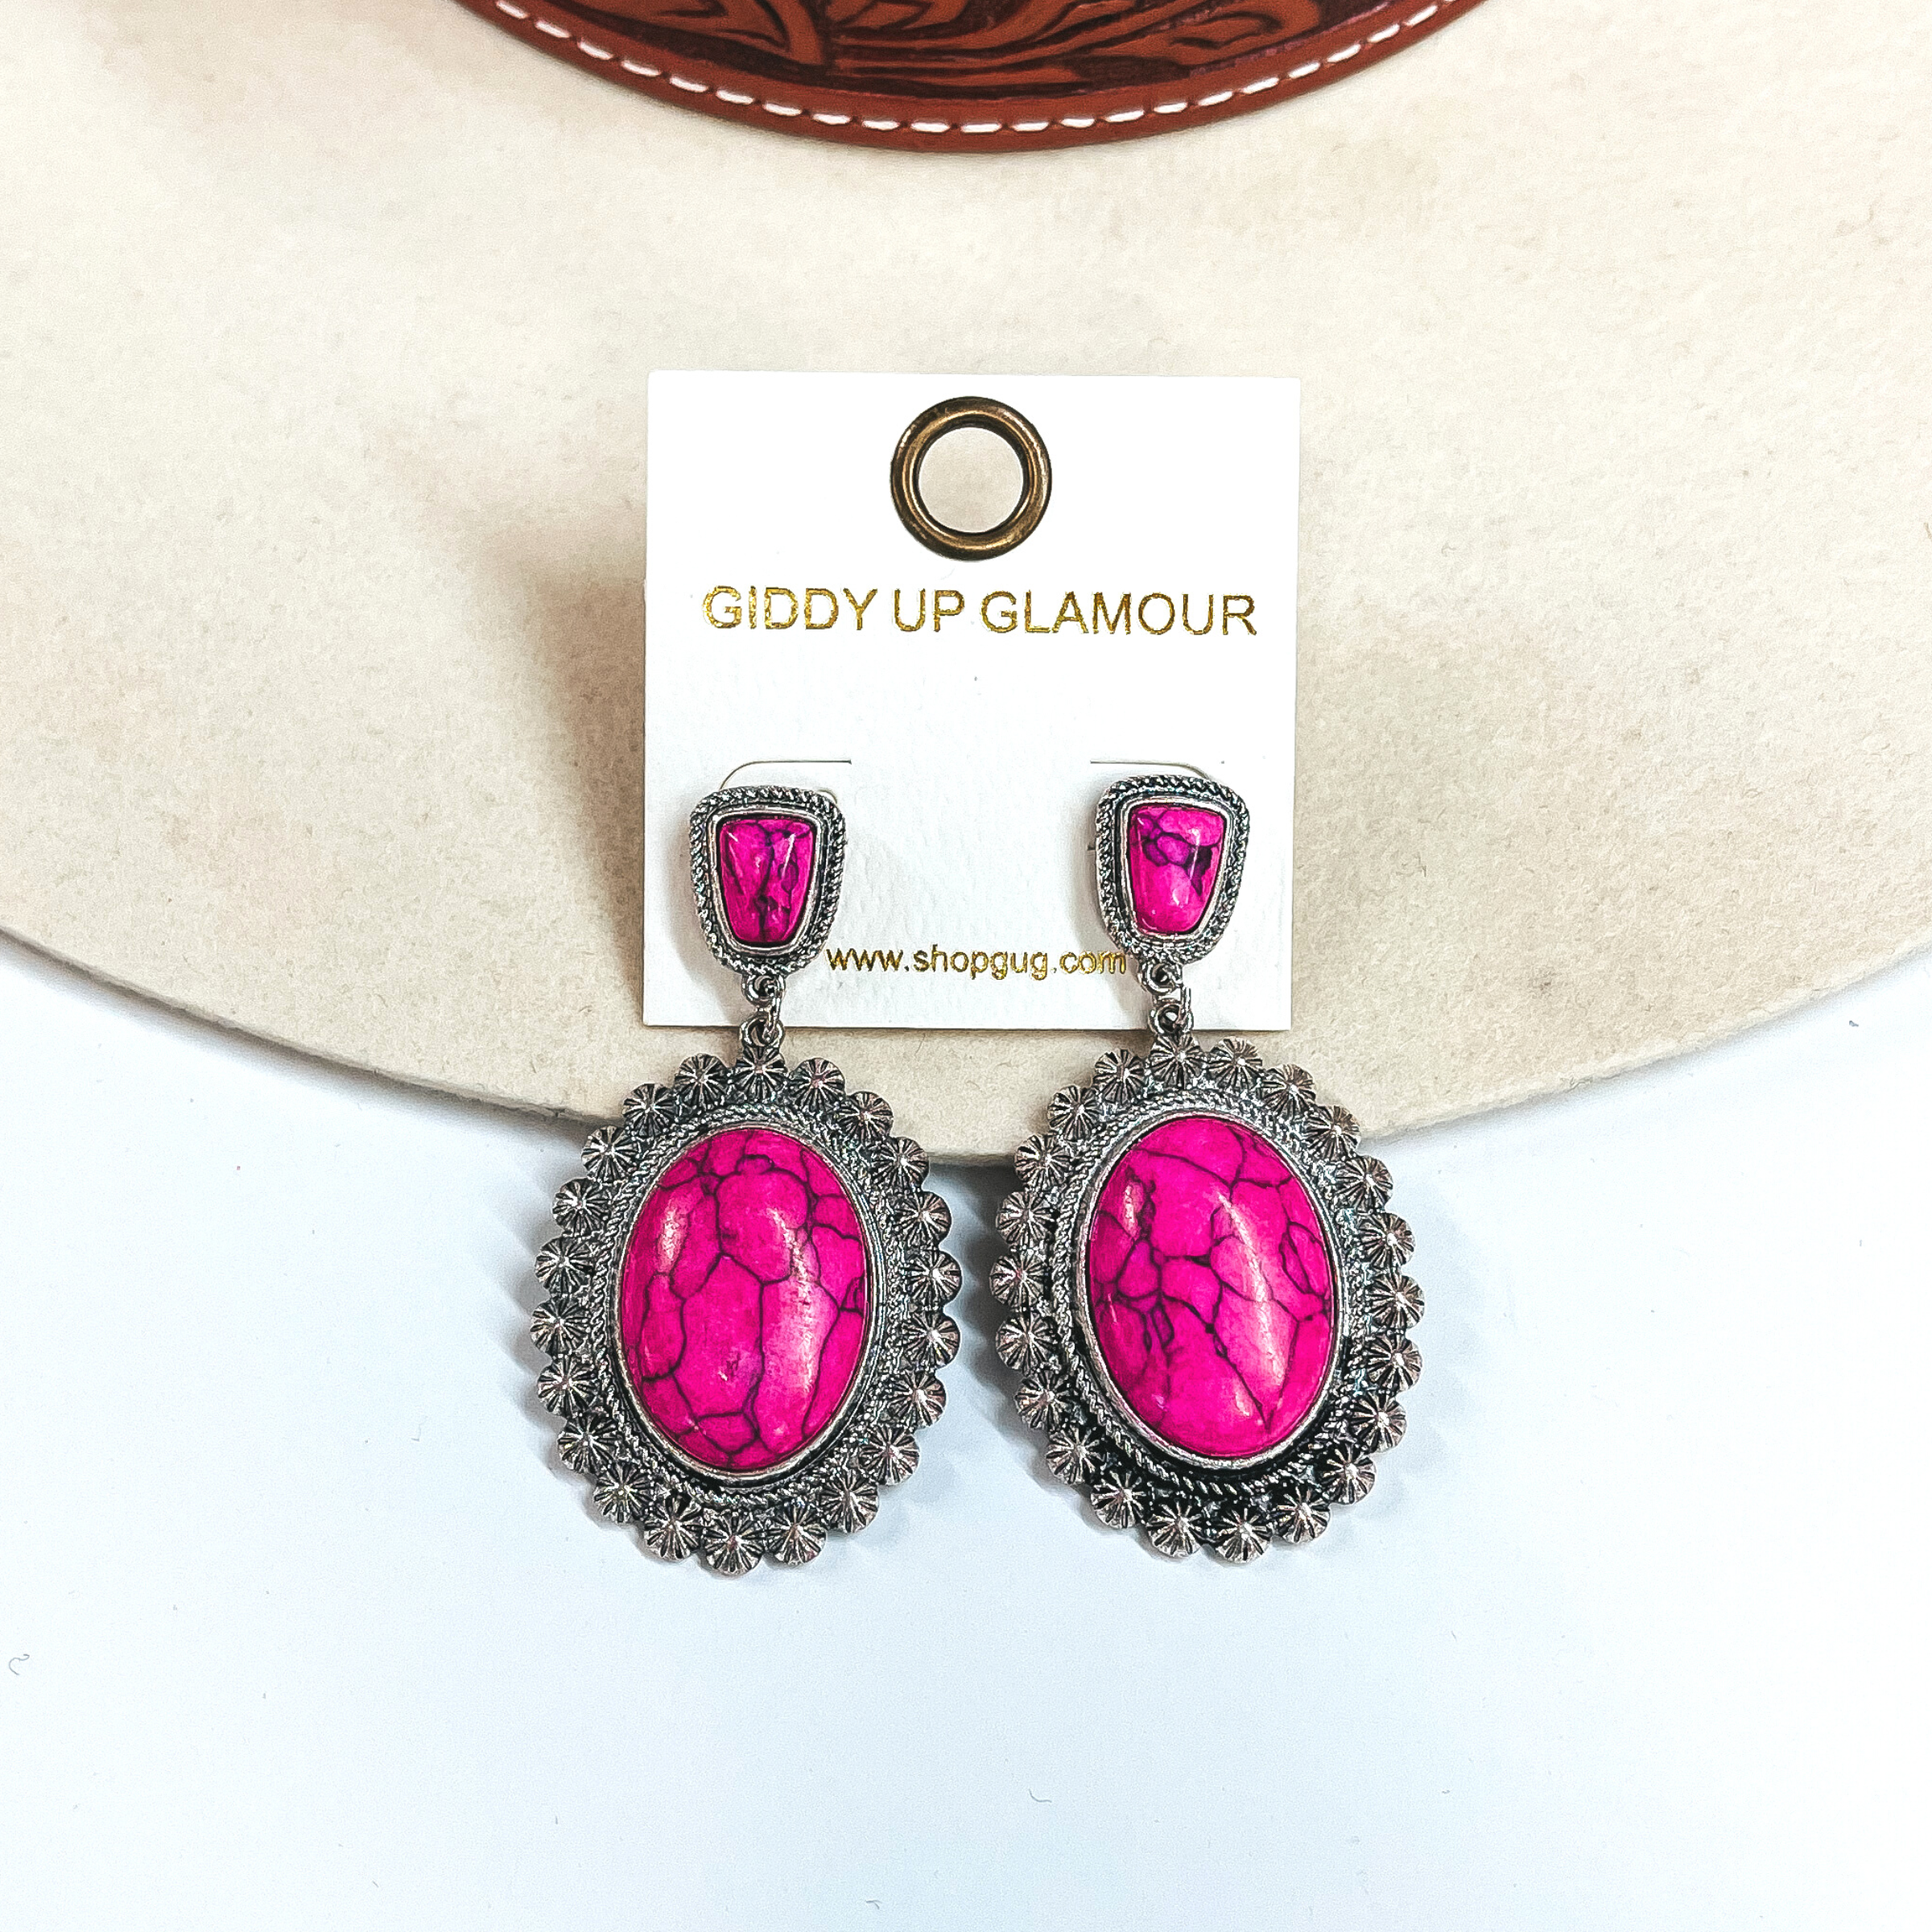 These are western silver post earrings with  faux pink stones. It has a small stone in a  silver textured setting and an oval drop, the oval  drop has a large oval pink stone in a silver western textured setting. These earrings are taken  on an ivory felt hat and a white background.